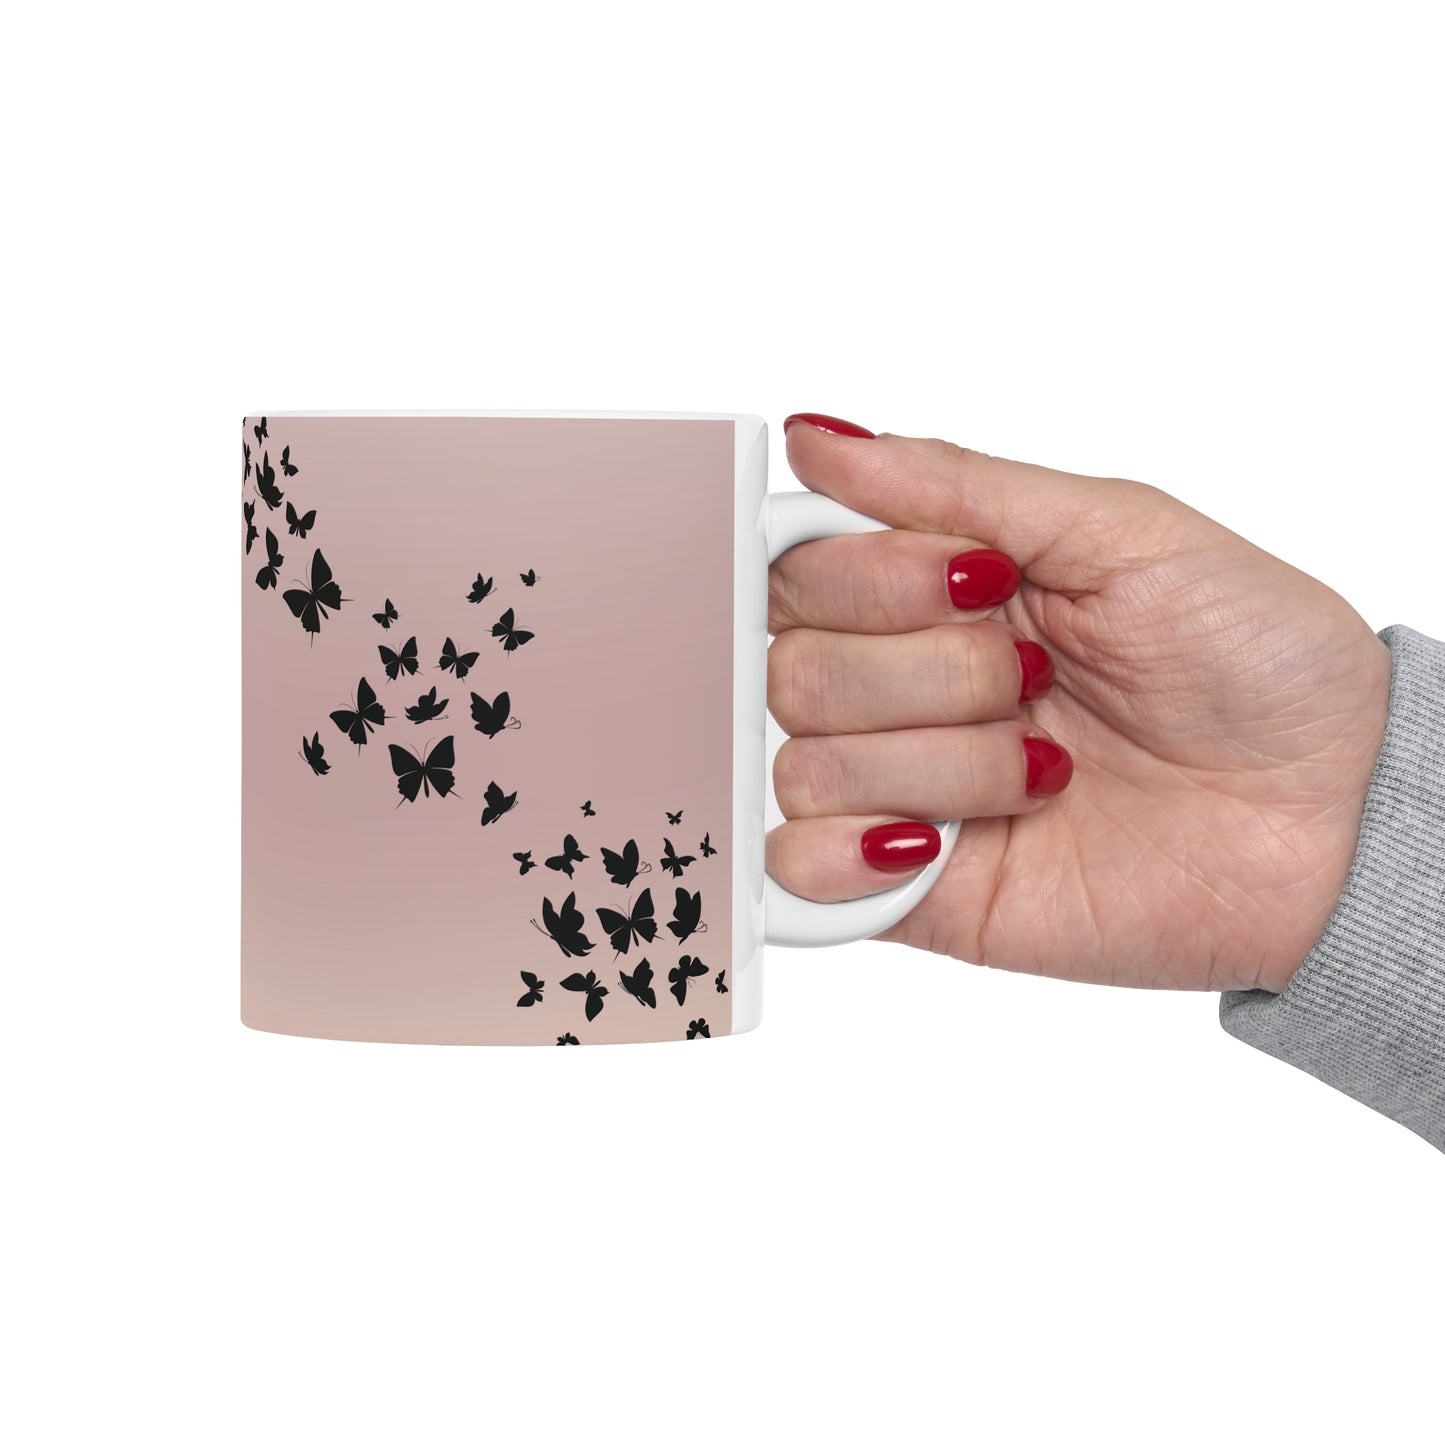 Being You Is Your Power Self-Empowerment Mug